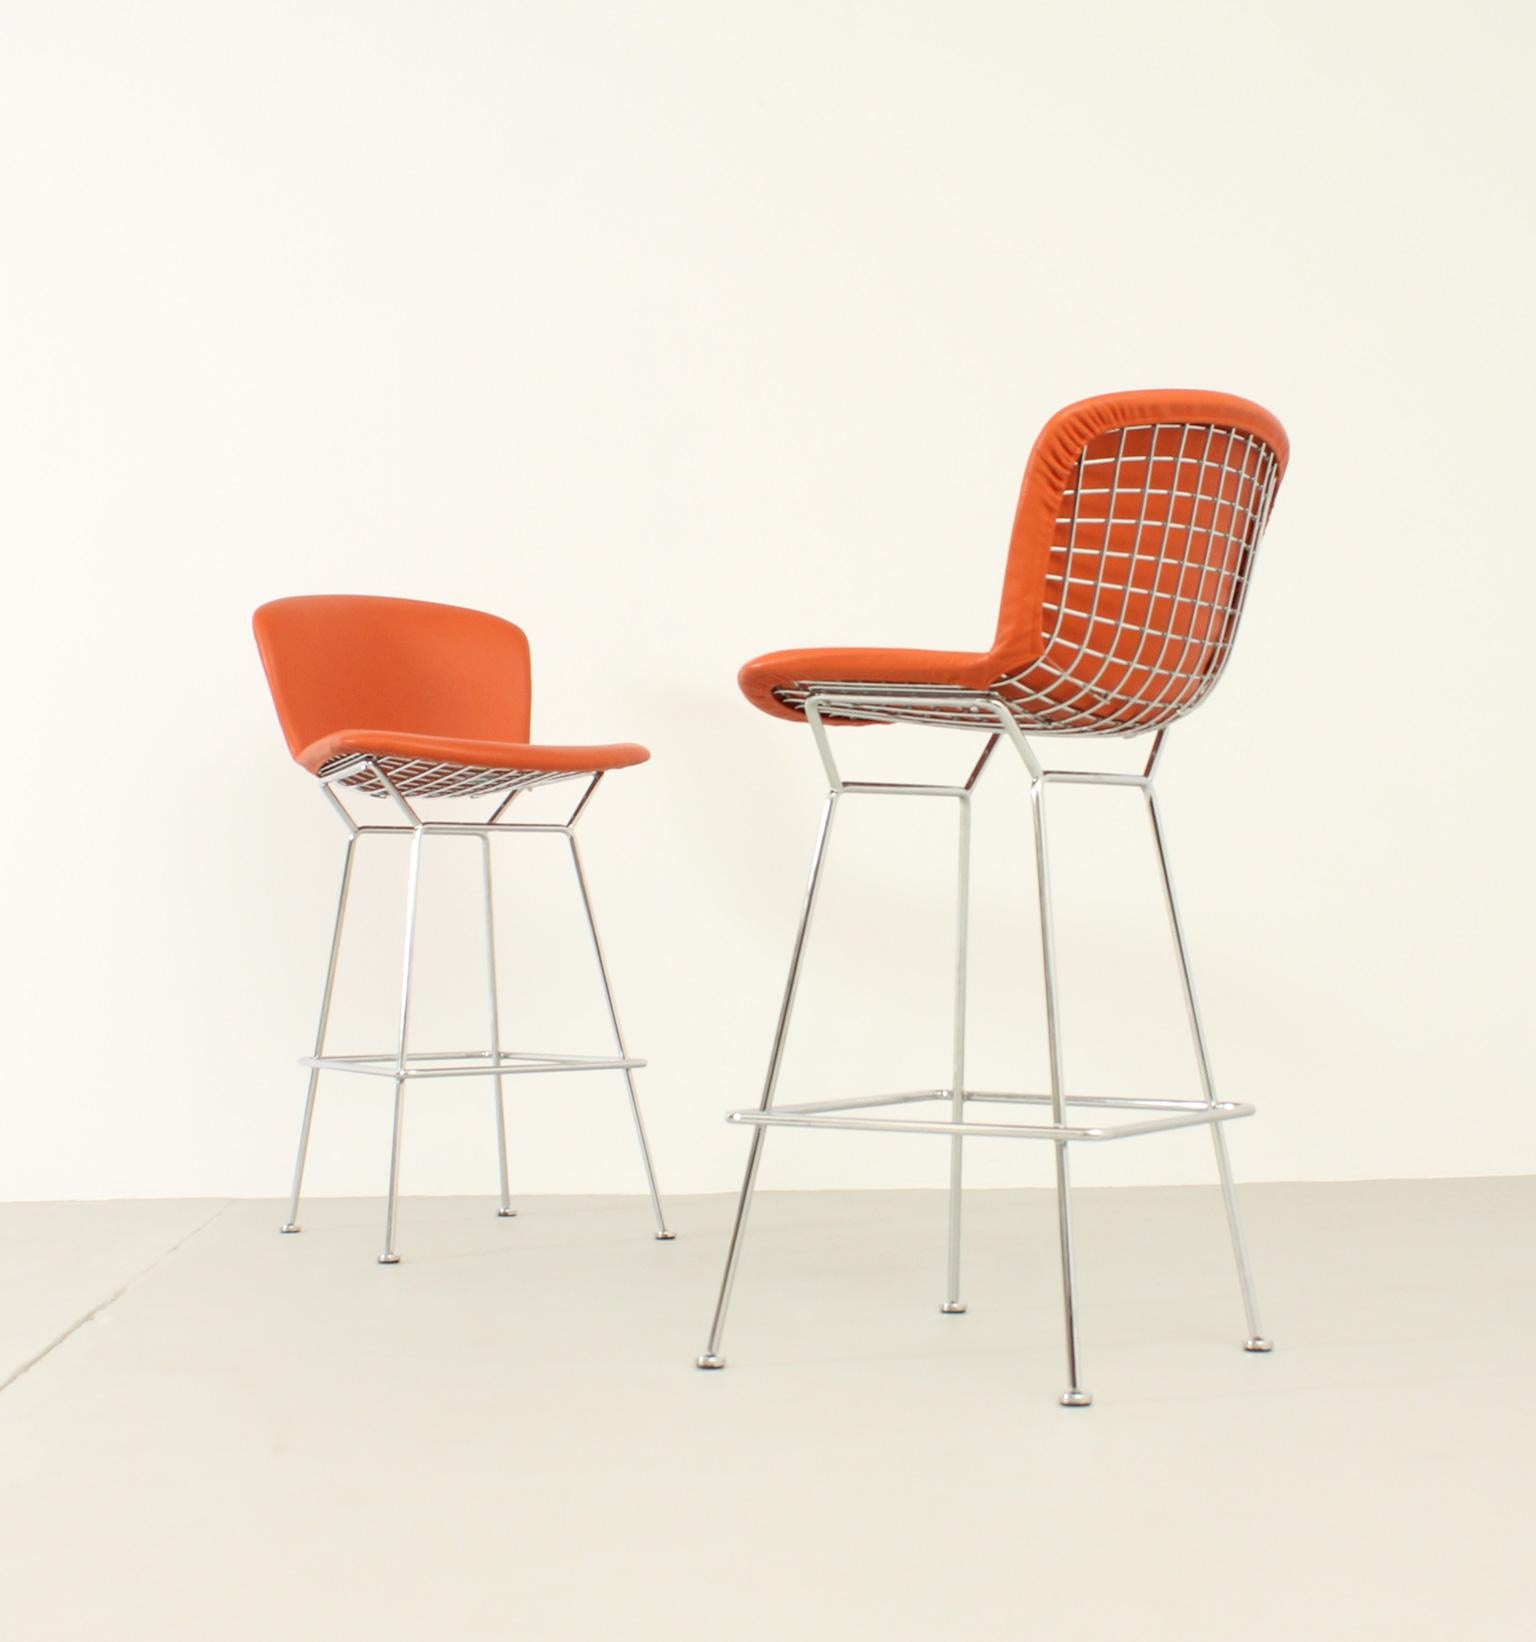 Pair of bar stools designed in 1952 by Harry Bertoia for Knoll, USA. Fully upholstered version in orange leather and polished chrome steel bases. Signed.